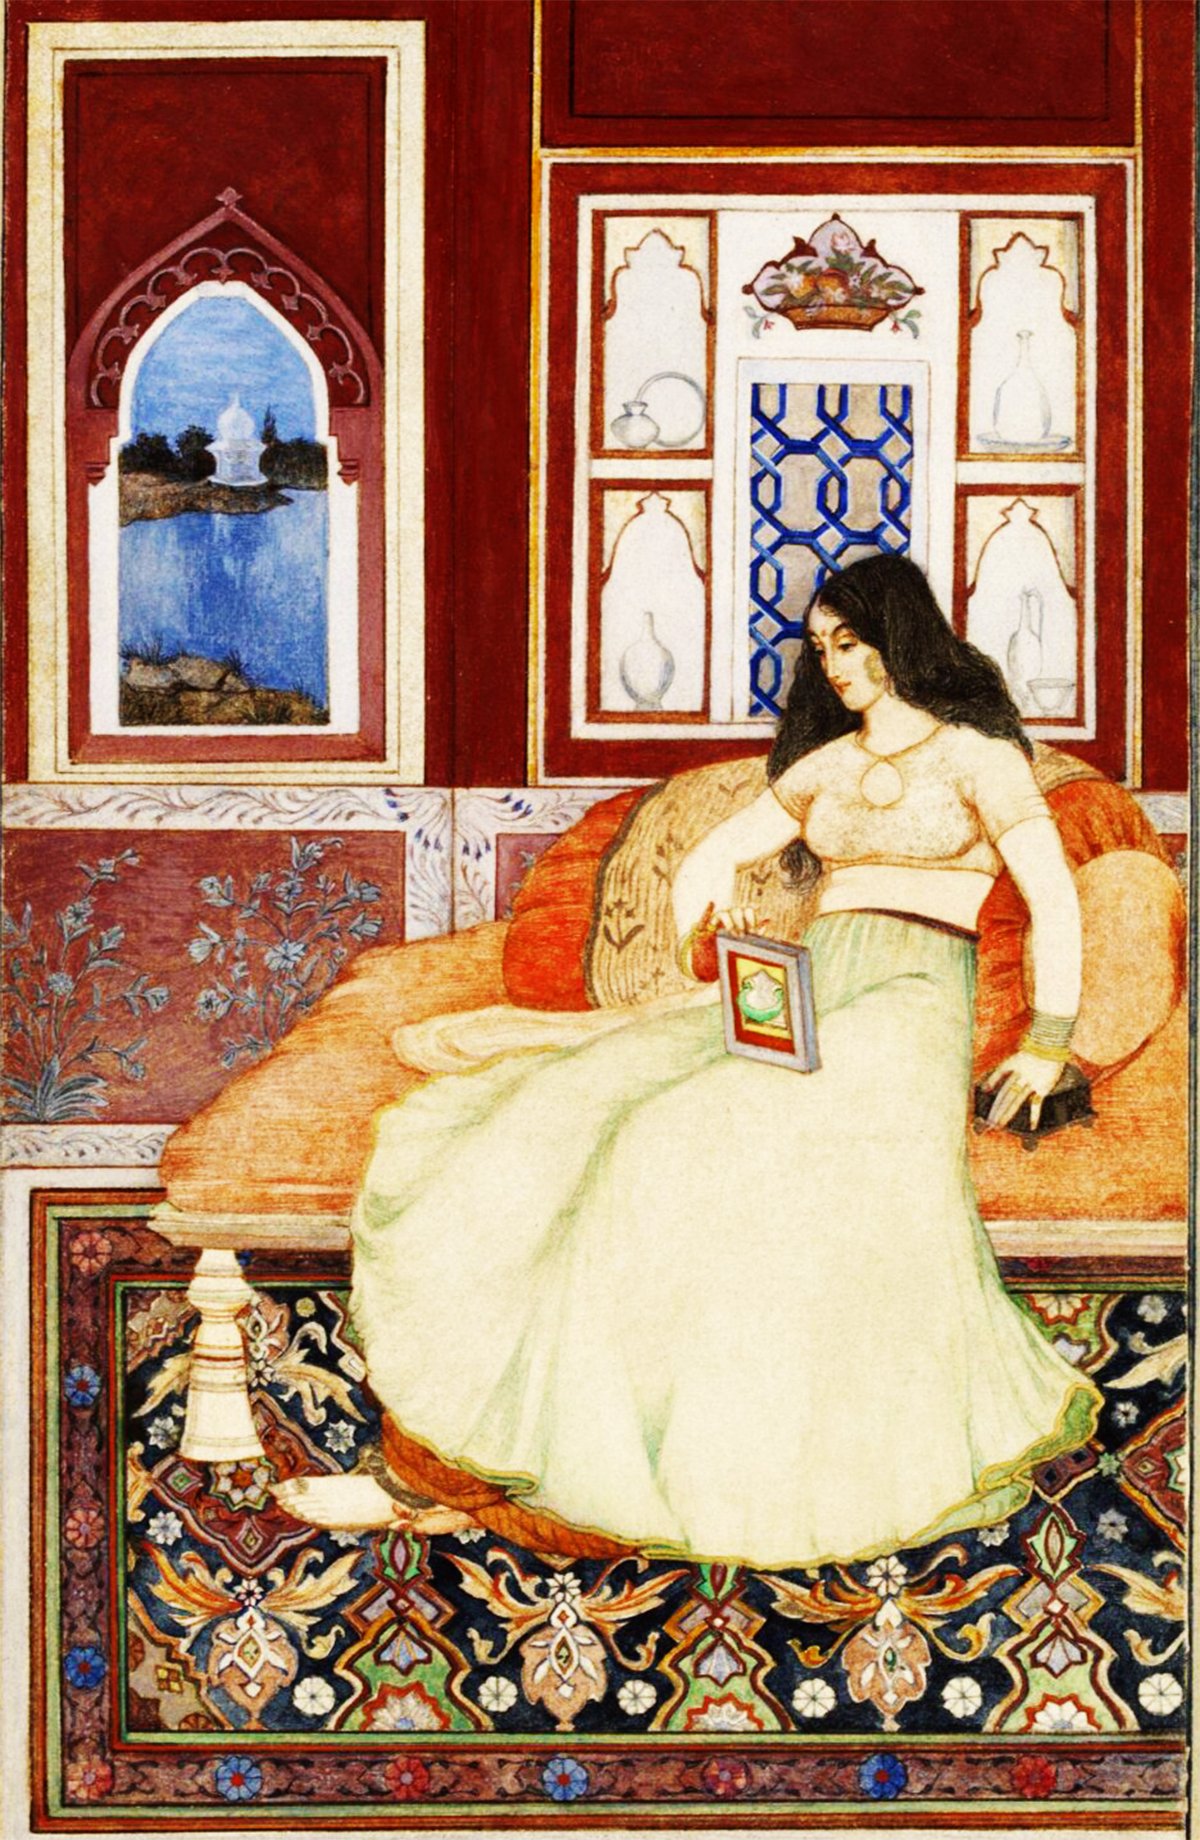 An illustration showcasing female literacy within the context of a harem library, where a woman is seated comfortably on an ornate couch, engrossed in reading a book. The setting suggests a private chamber, with a view of a serene blue landscape through a window. The rich detail of the room and the vibrant colors of the carpet, as well as the intricate design of the woman's attire, emphasize the cultural and educational aspects of the time.